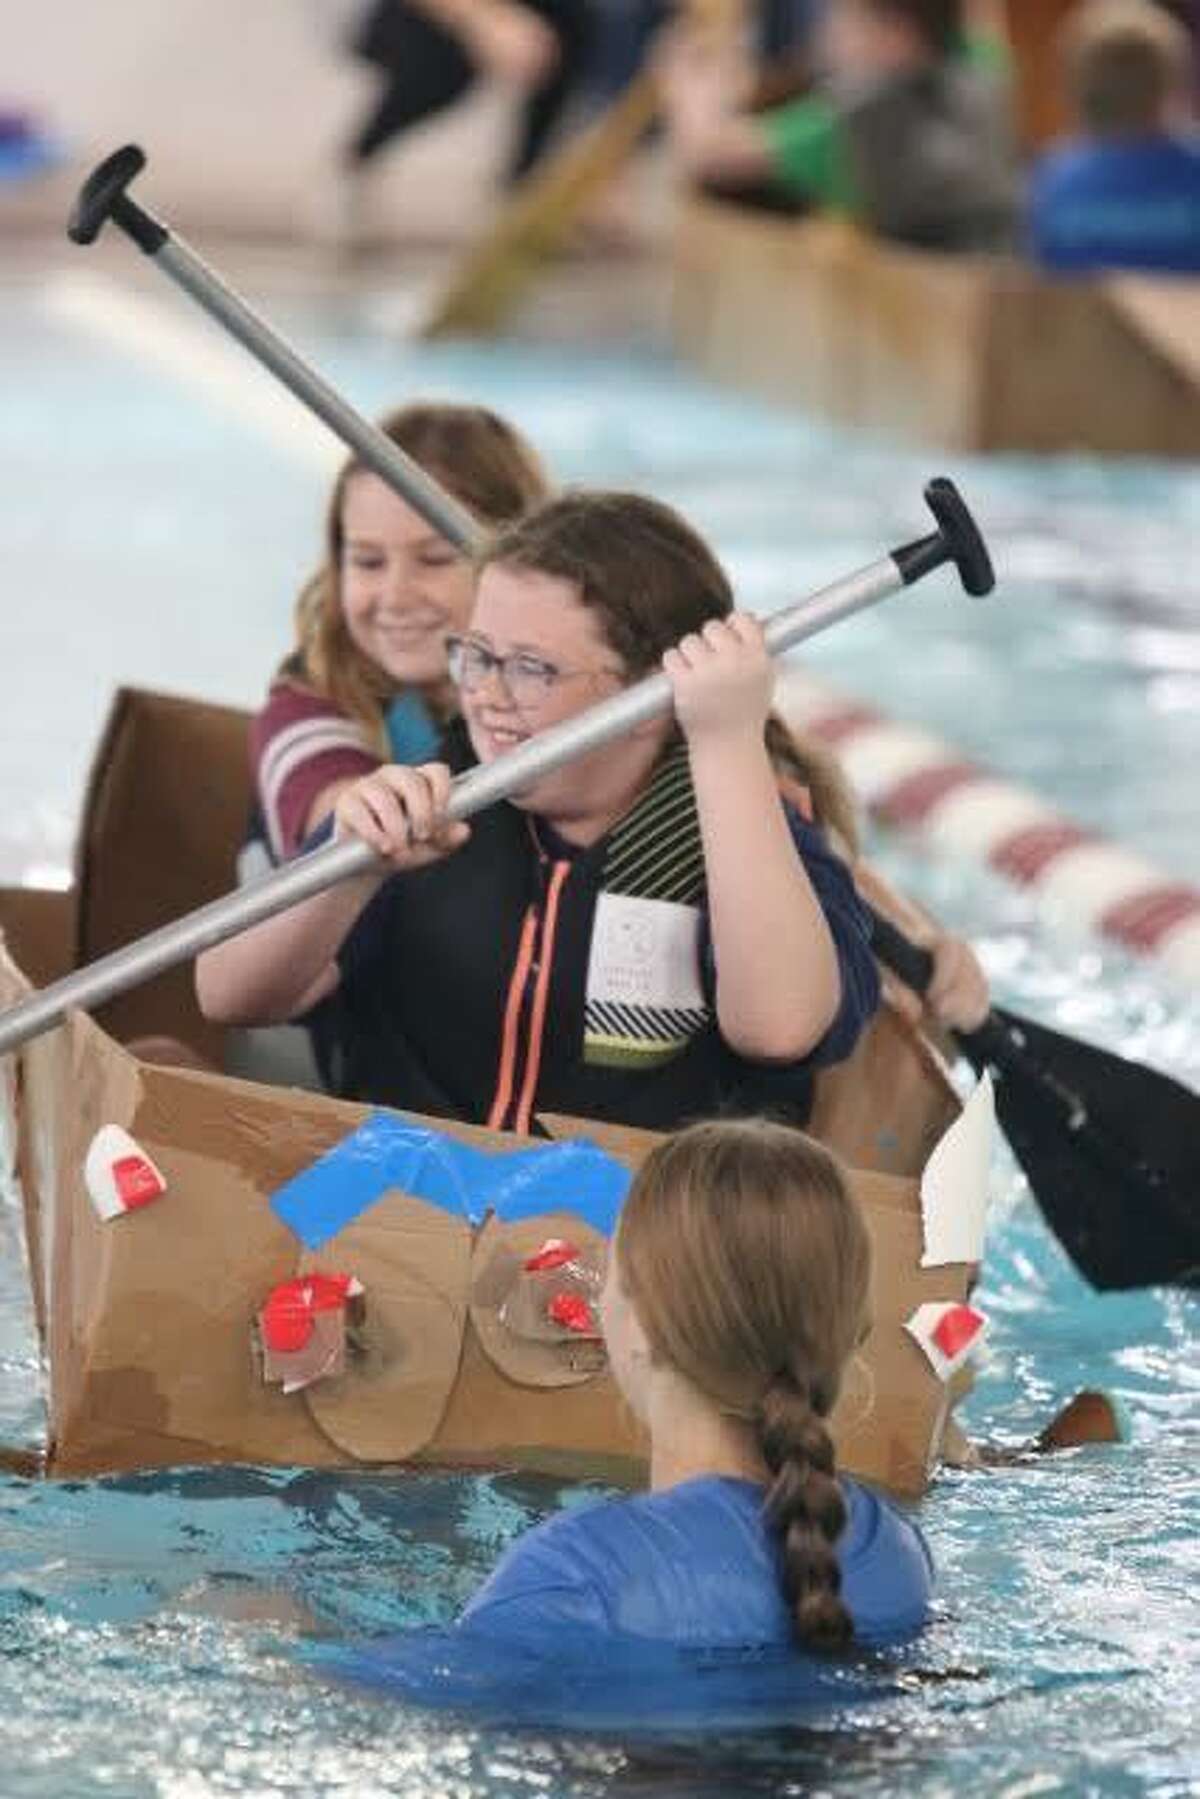 Magnolia ISD students participate in a regatta after working to build cardboard boats throughout the fall 2021 semester.